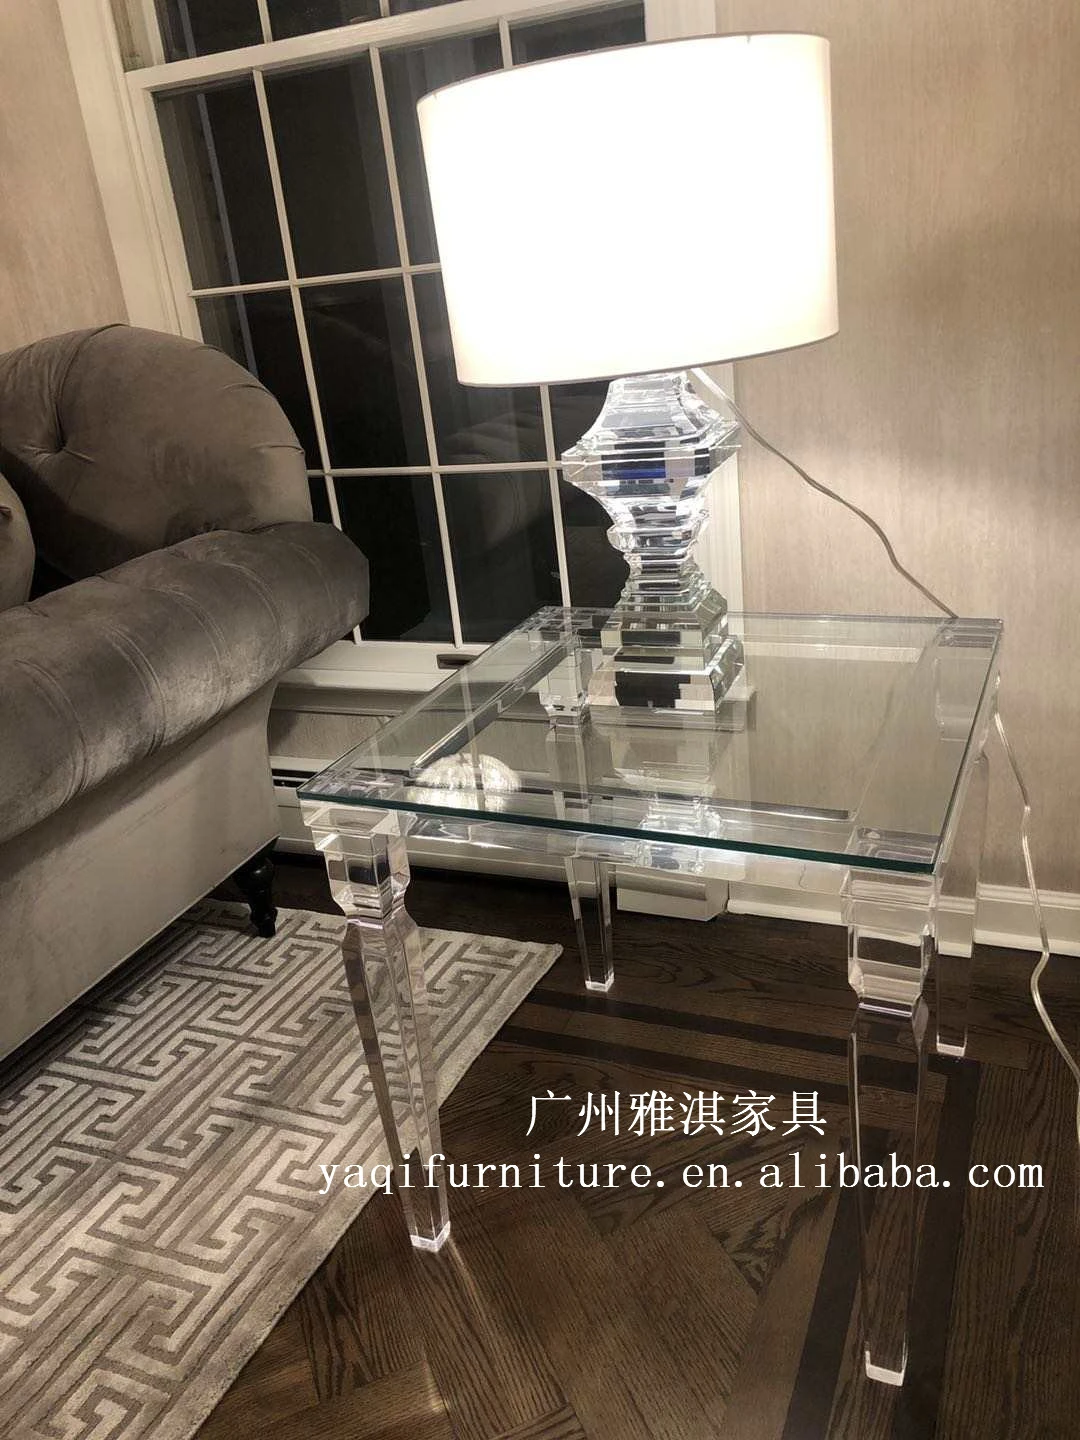 2021 High quality modern design acrylic bed side table customized size